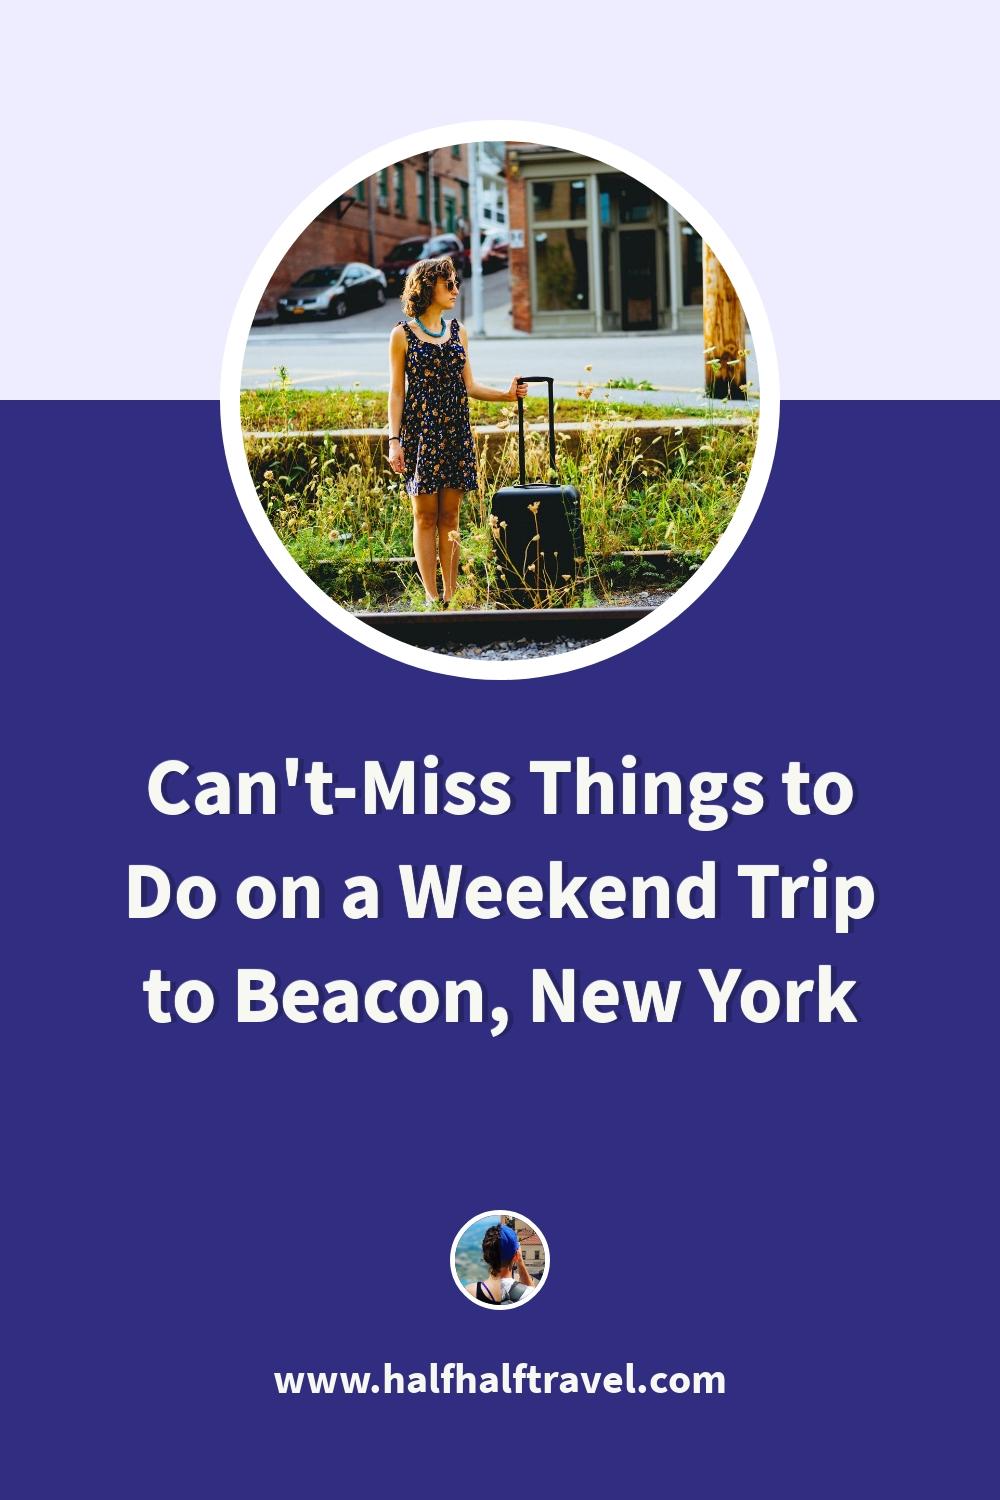 Pinterest image from the 'Can't-Miss Things to Do on a Weekend Trip to Beacon, New York' article on Half Half Travel